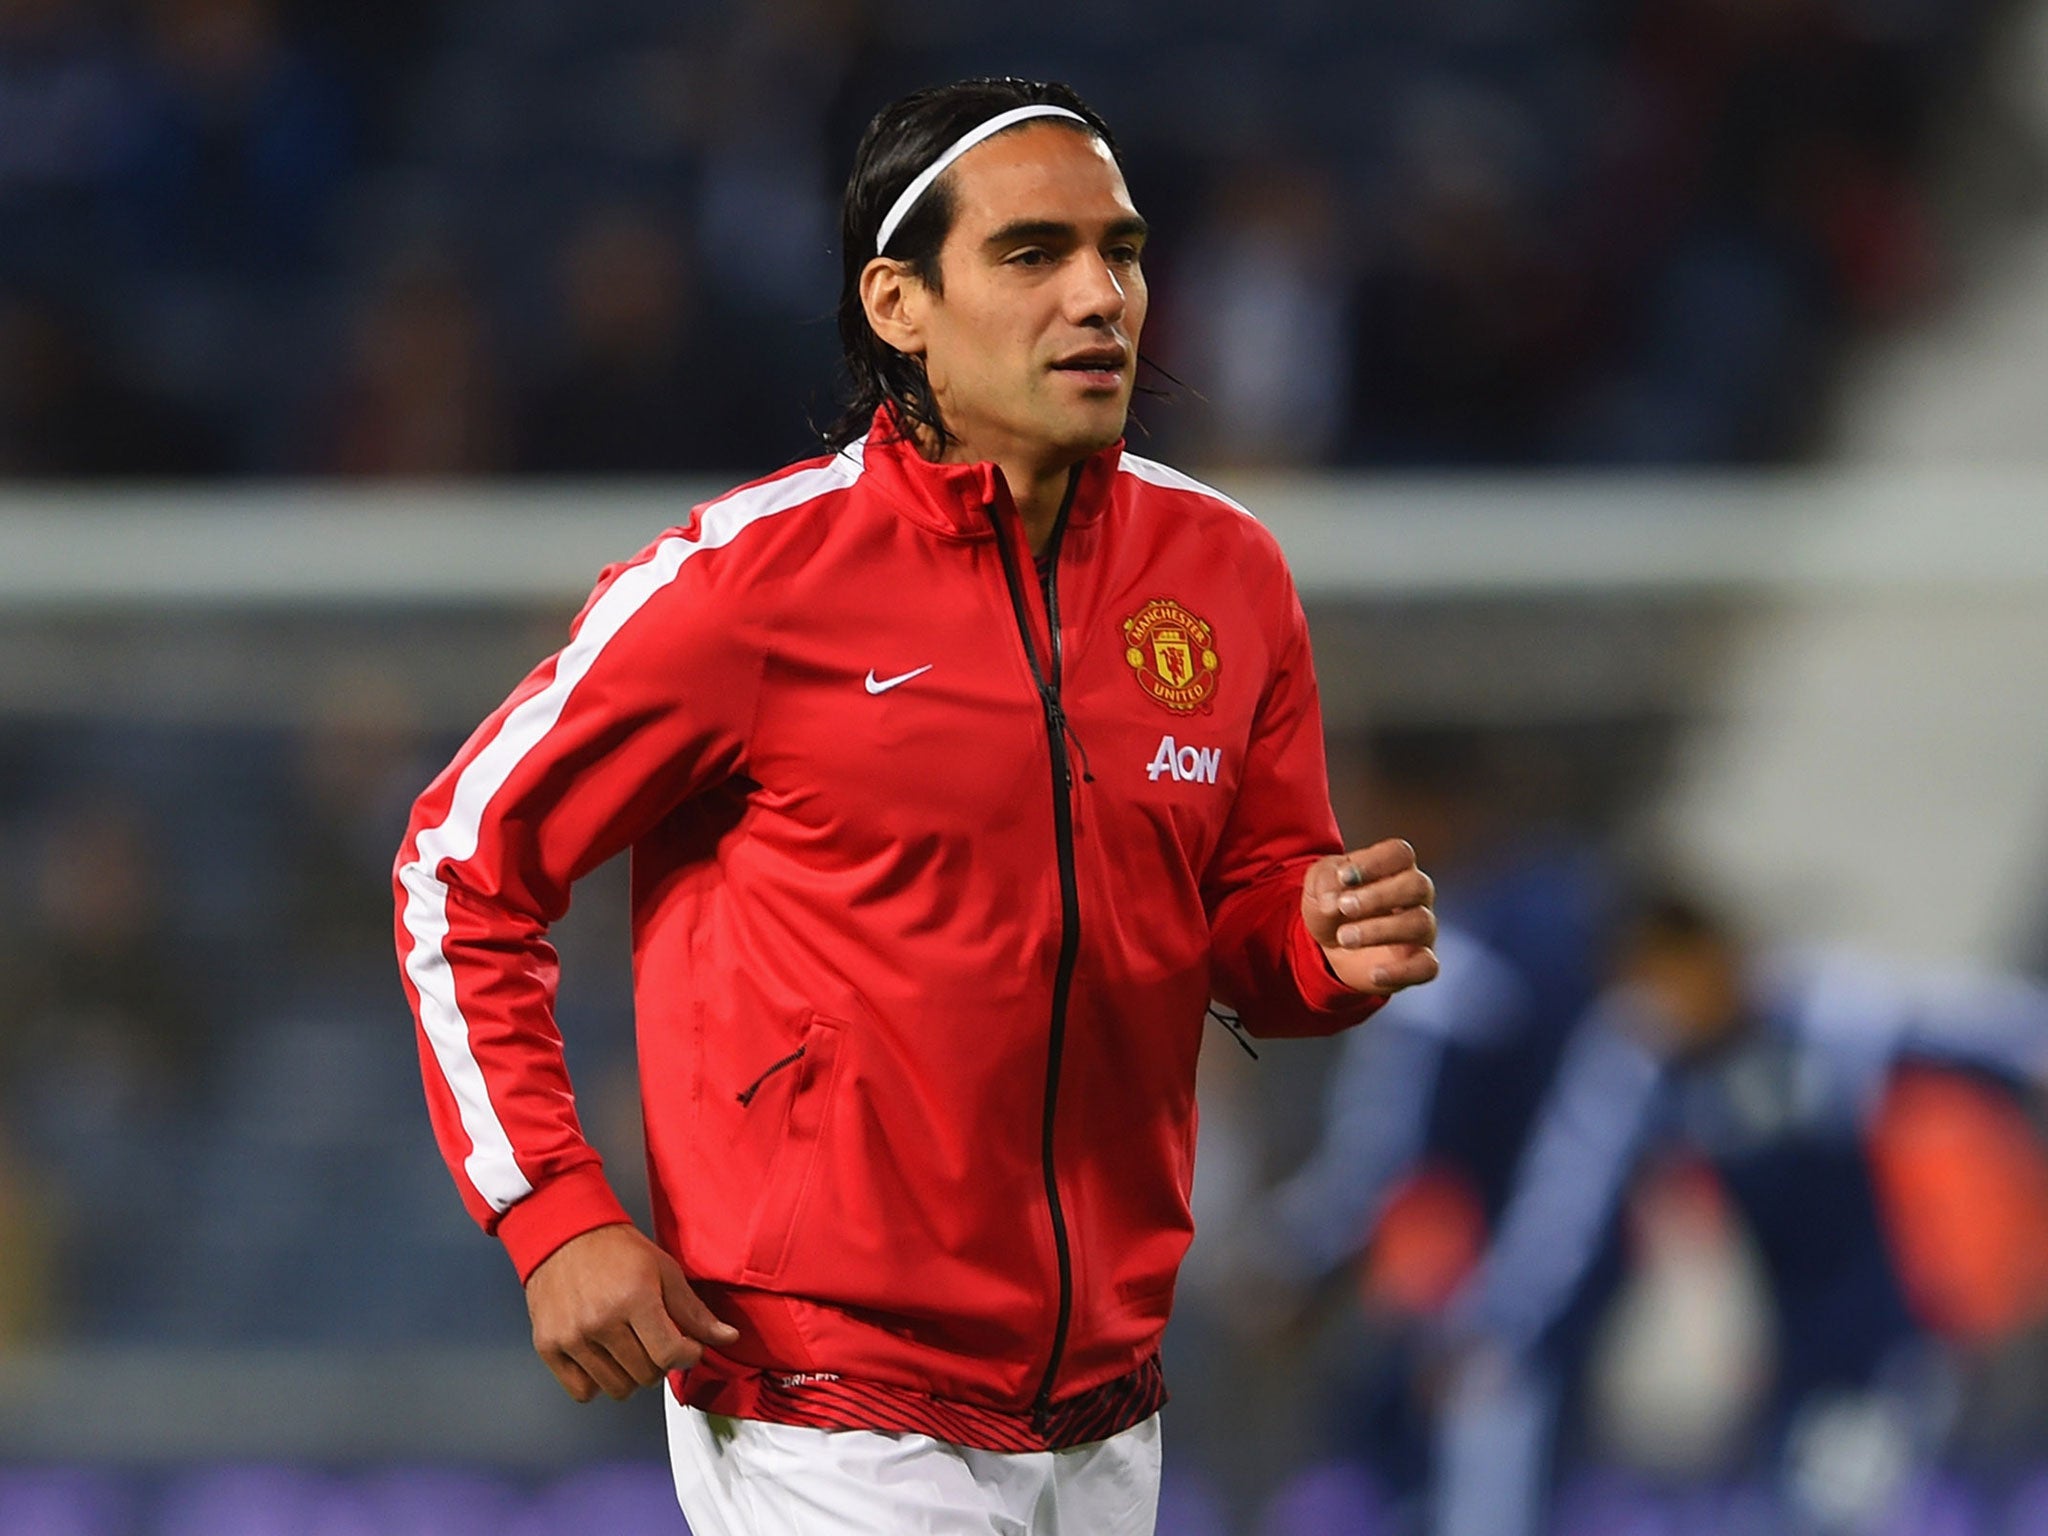 Radamel Falcao has scored one goal for United since he joined the club in the summer